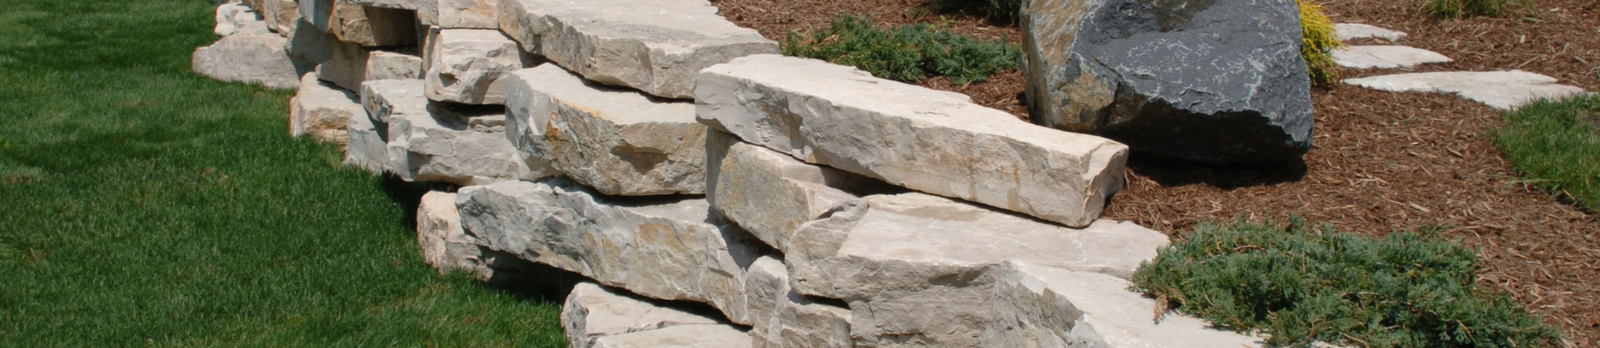 Outcropping Stones